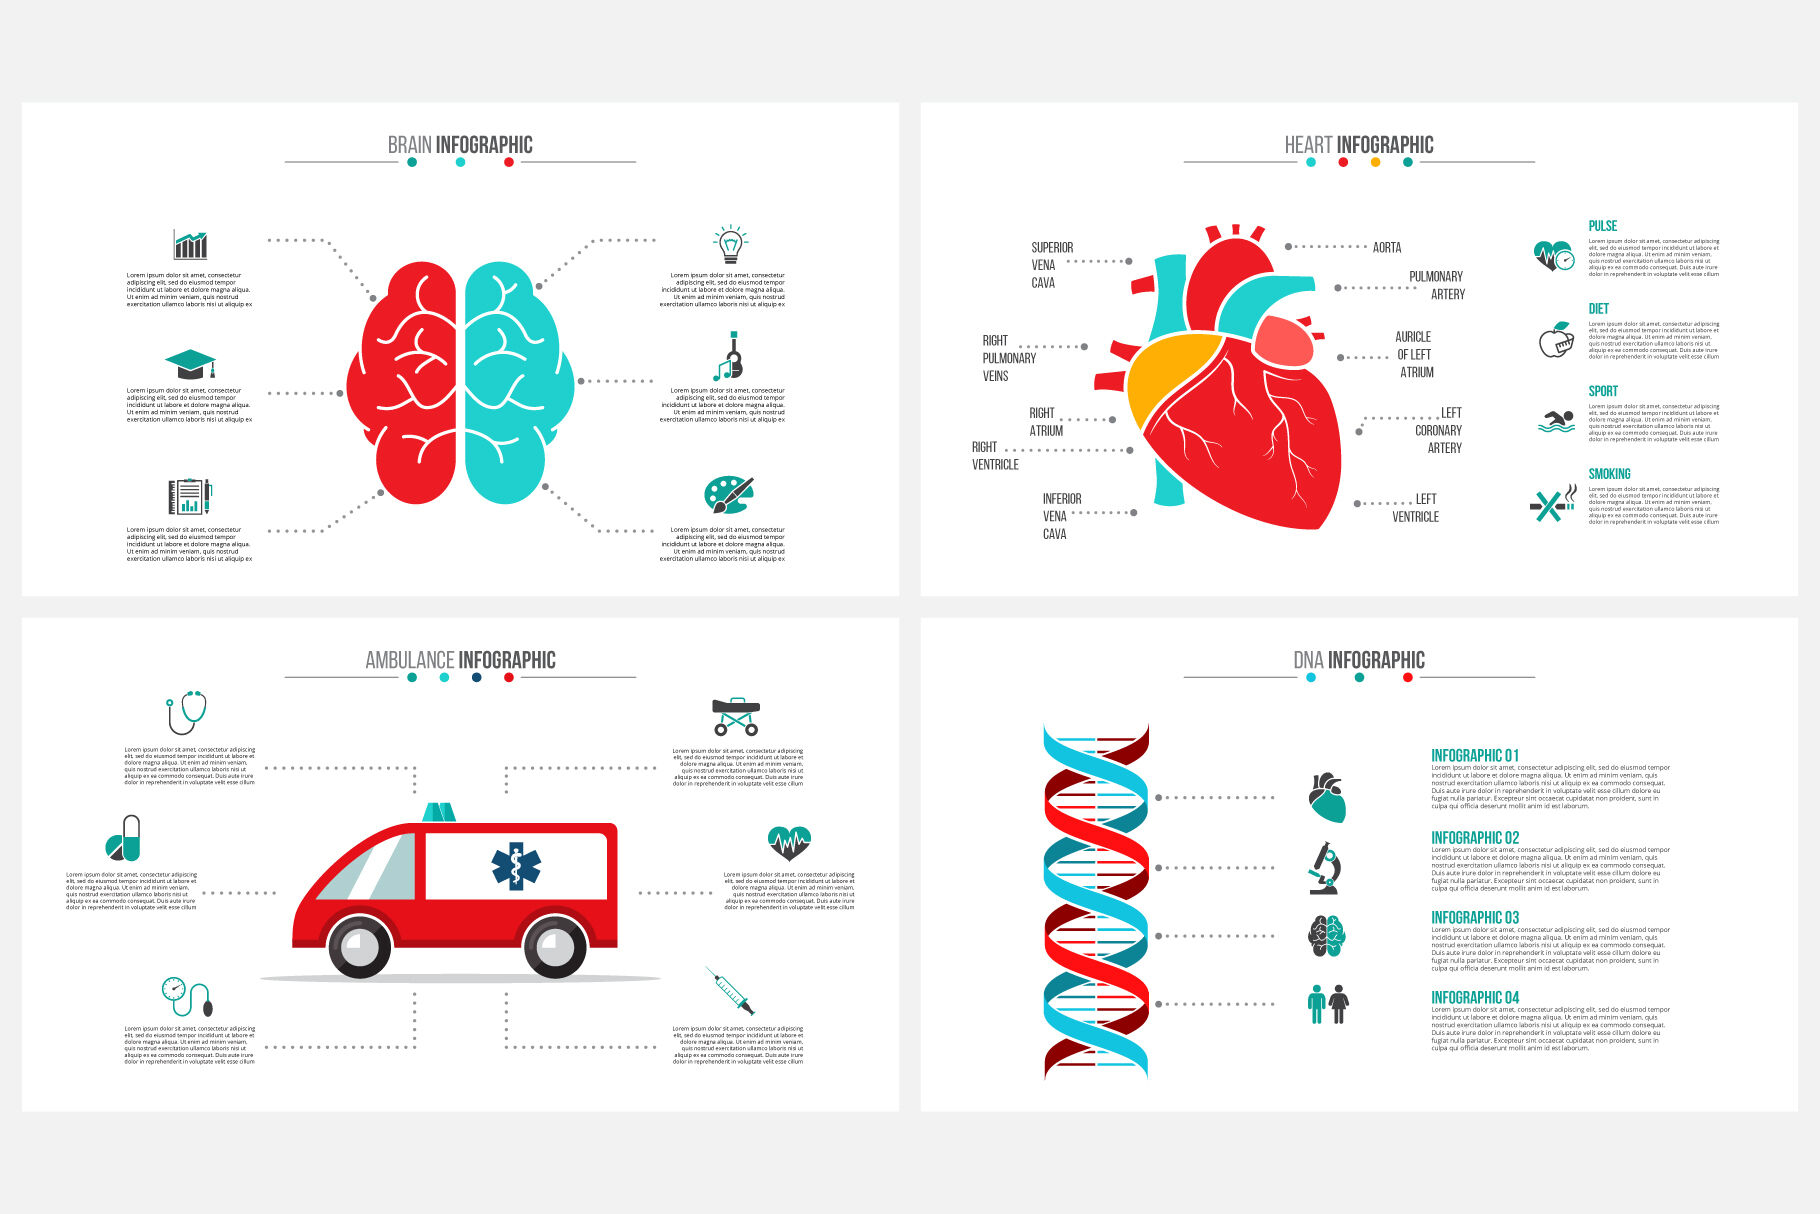 Custom animated infographic gifs - Queen of Infographics